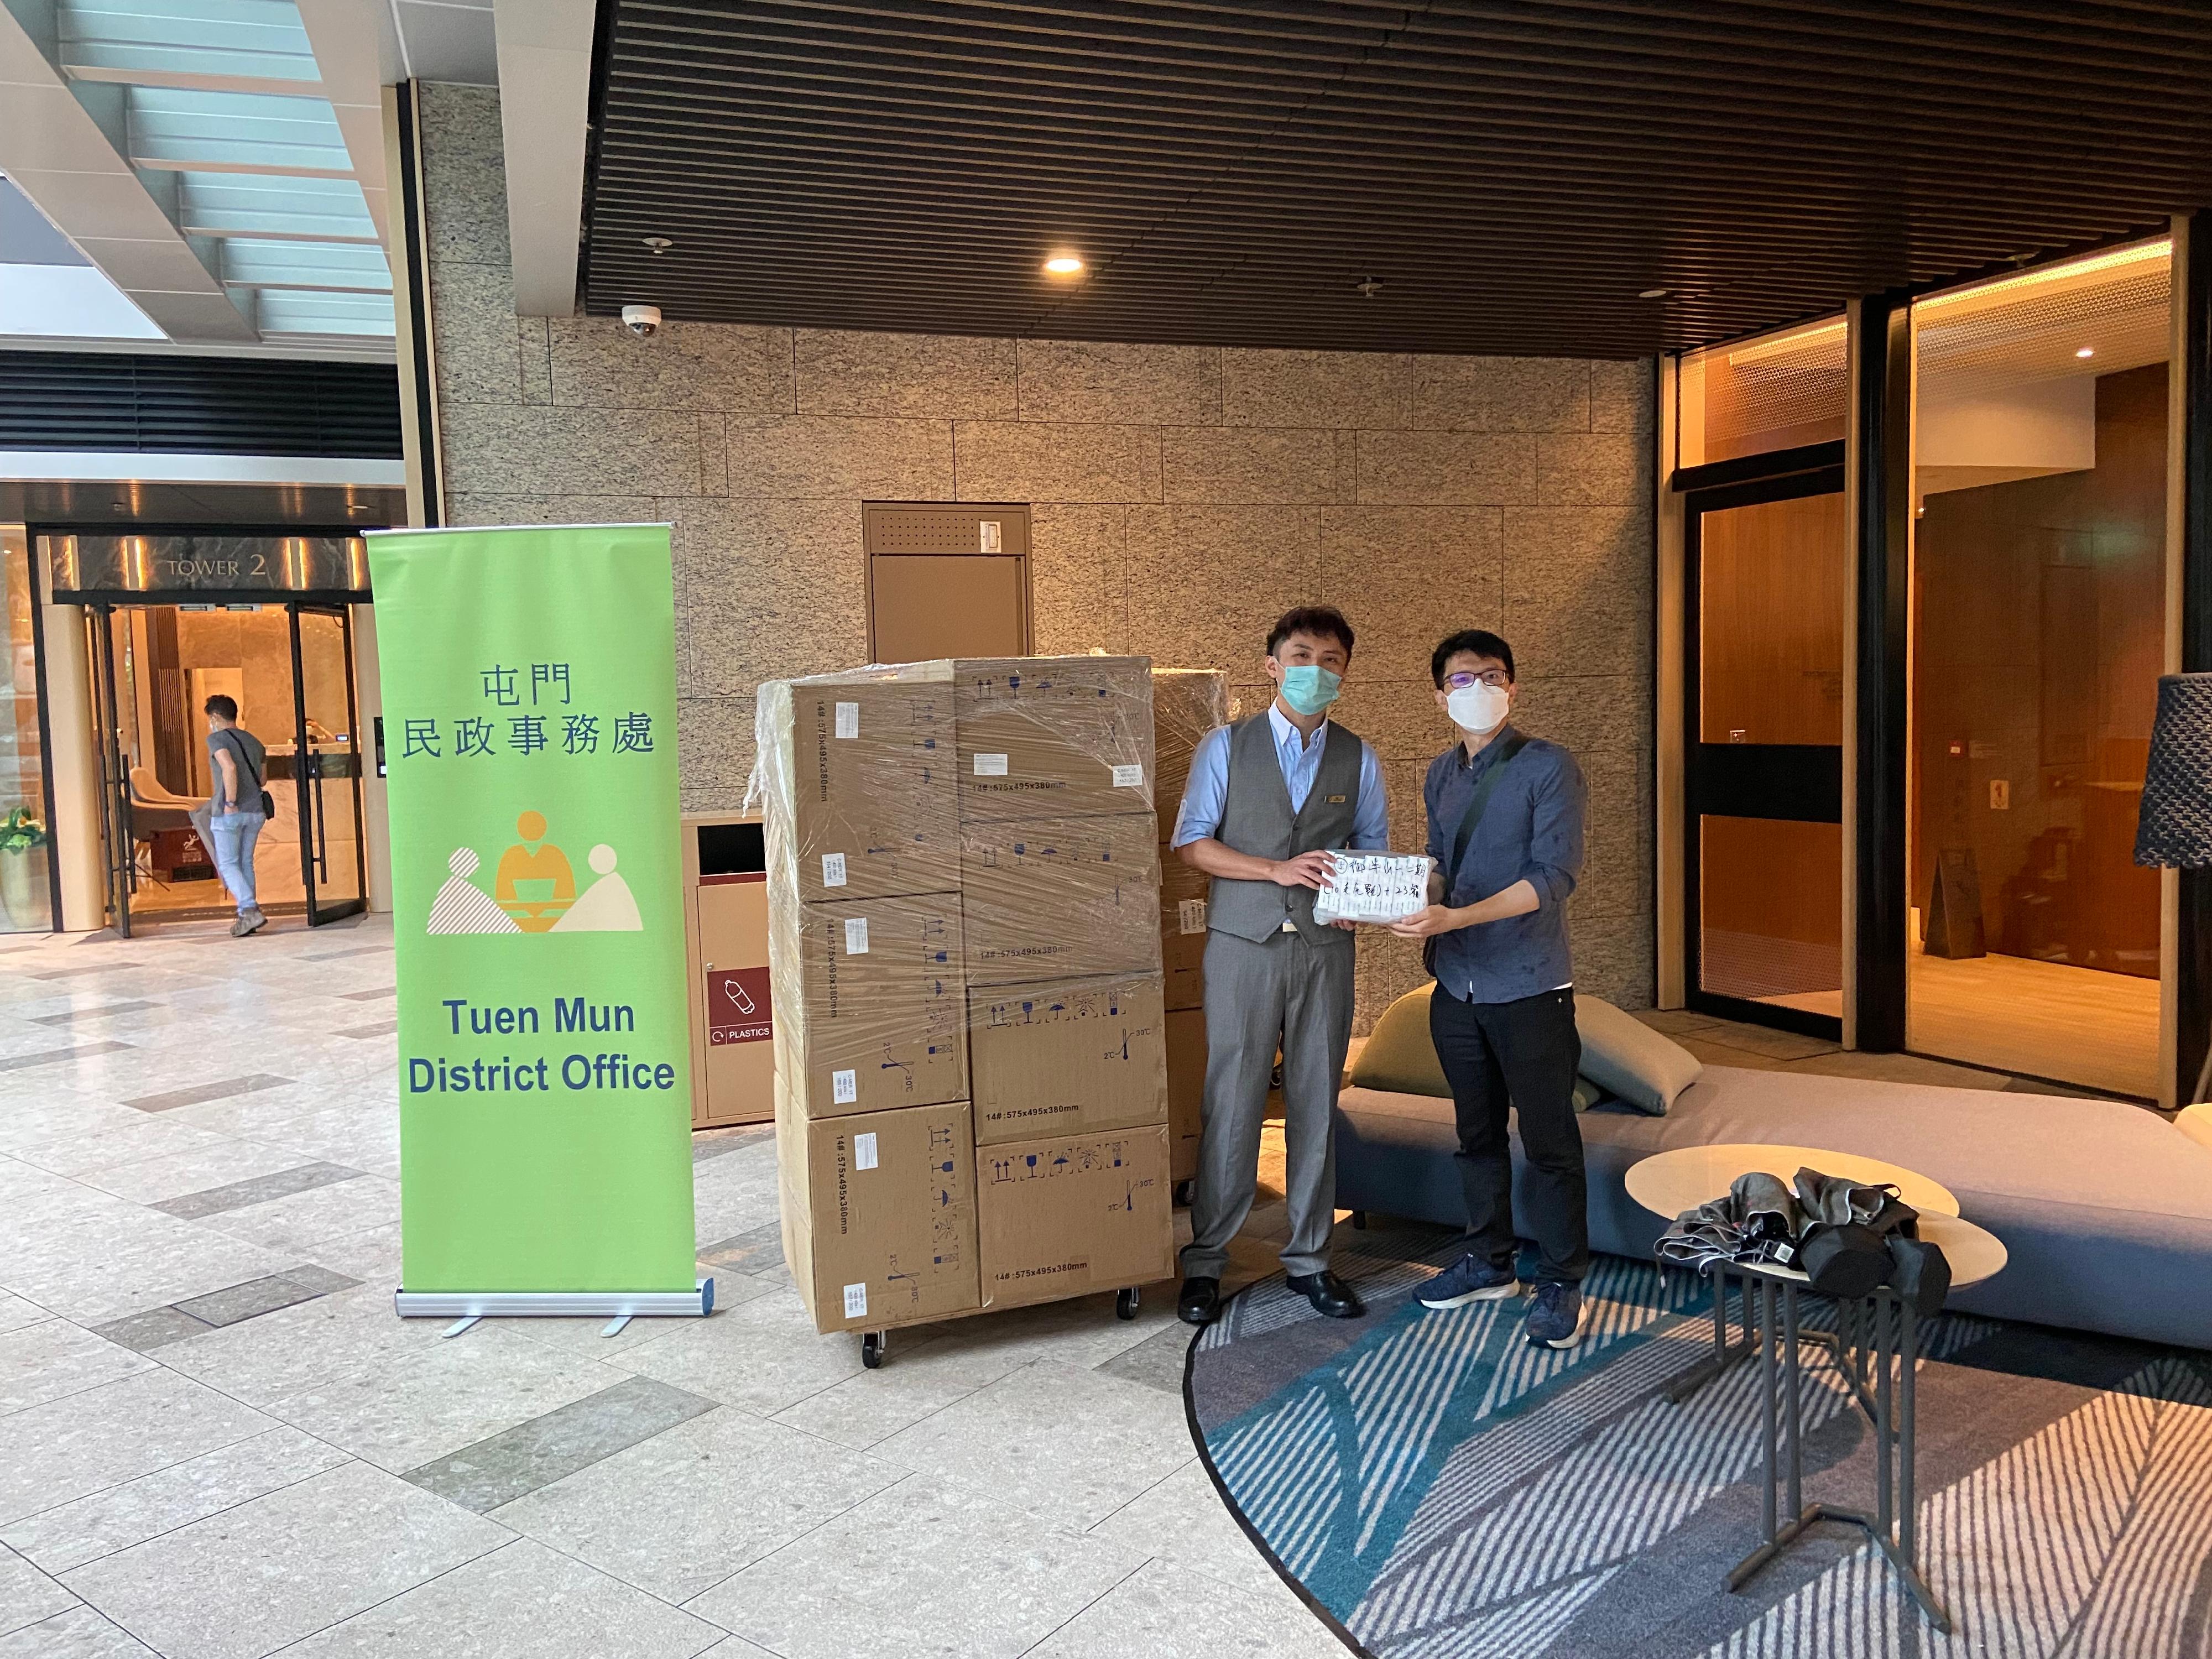 The Tuen Mun District Office today (May 12) distributed COVID-19 rapid test kits to households, cleansing workers and property management staff living and working in Mount Regency and Mount Regency Phase II for voluntary testing through the property management company.